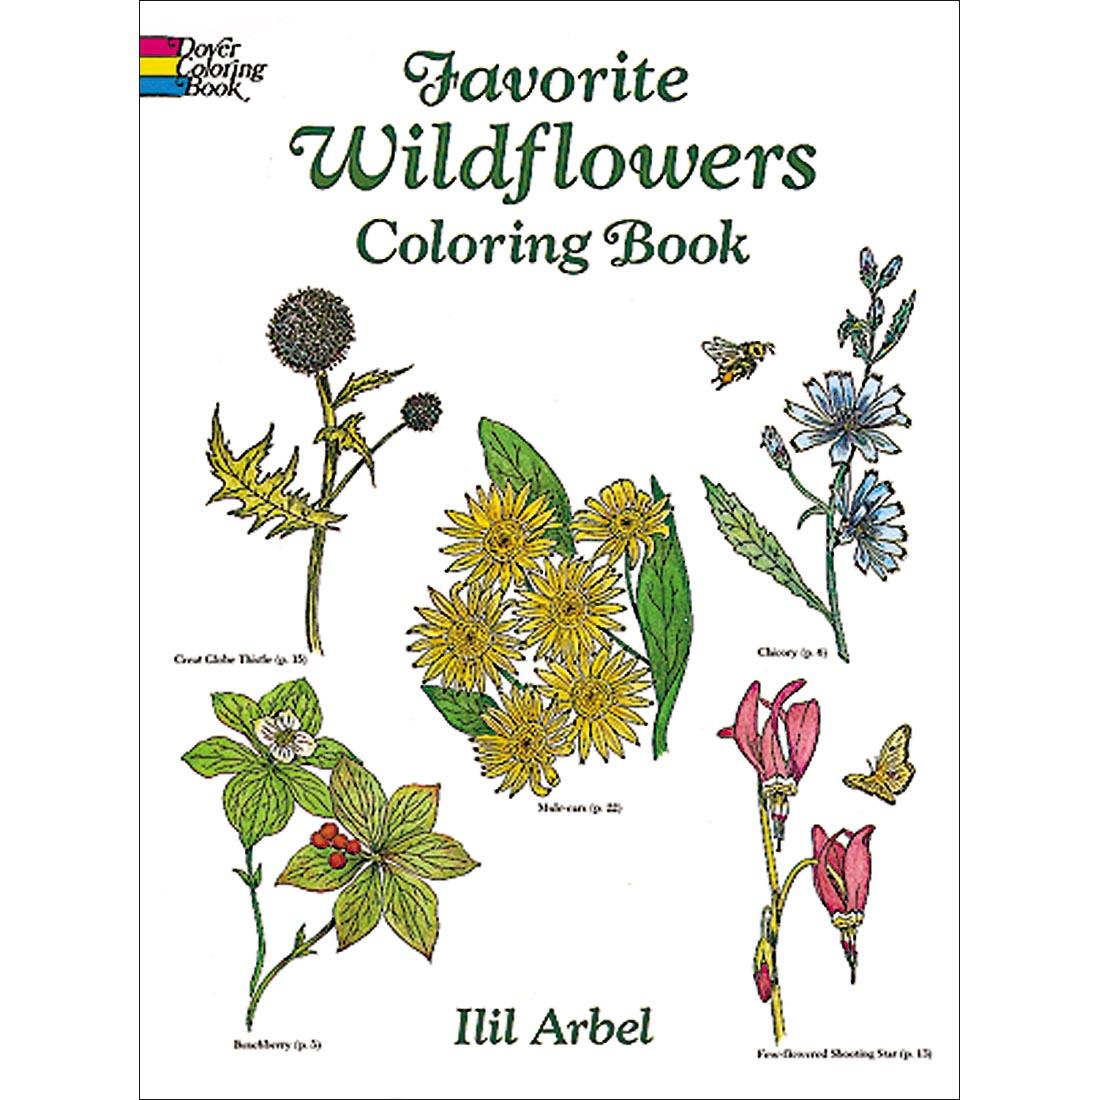 Favorite Wildflowers Coloring Book by Dover